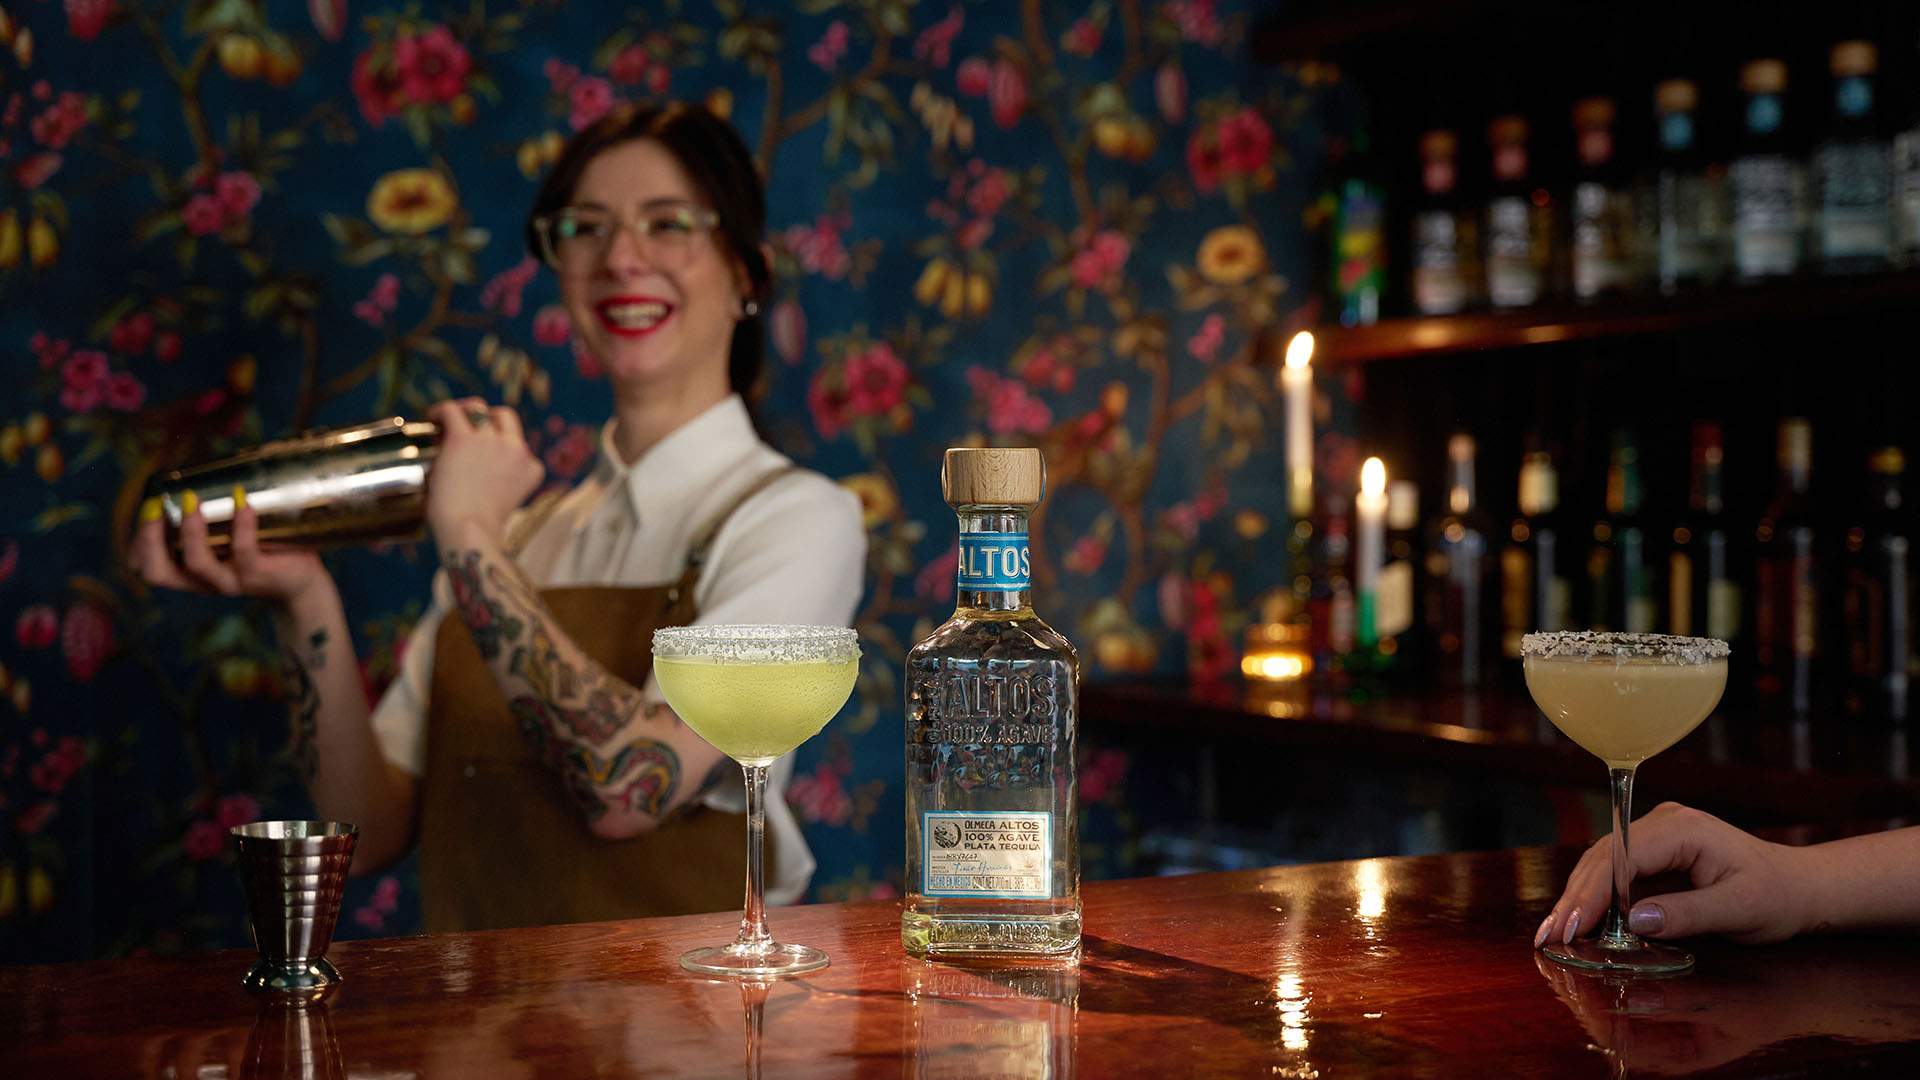 This Tequila Brand Is Handing Out 10,000 Free Cocktails to Celebrate International Margarita Day